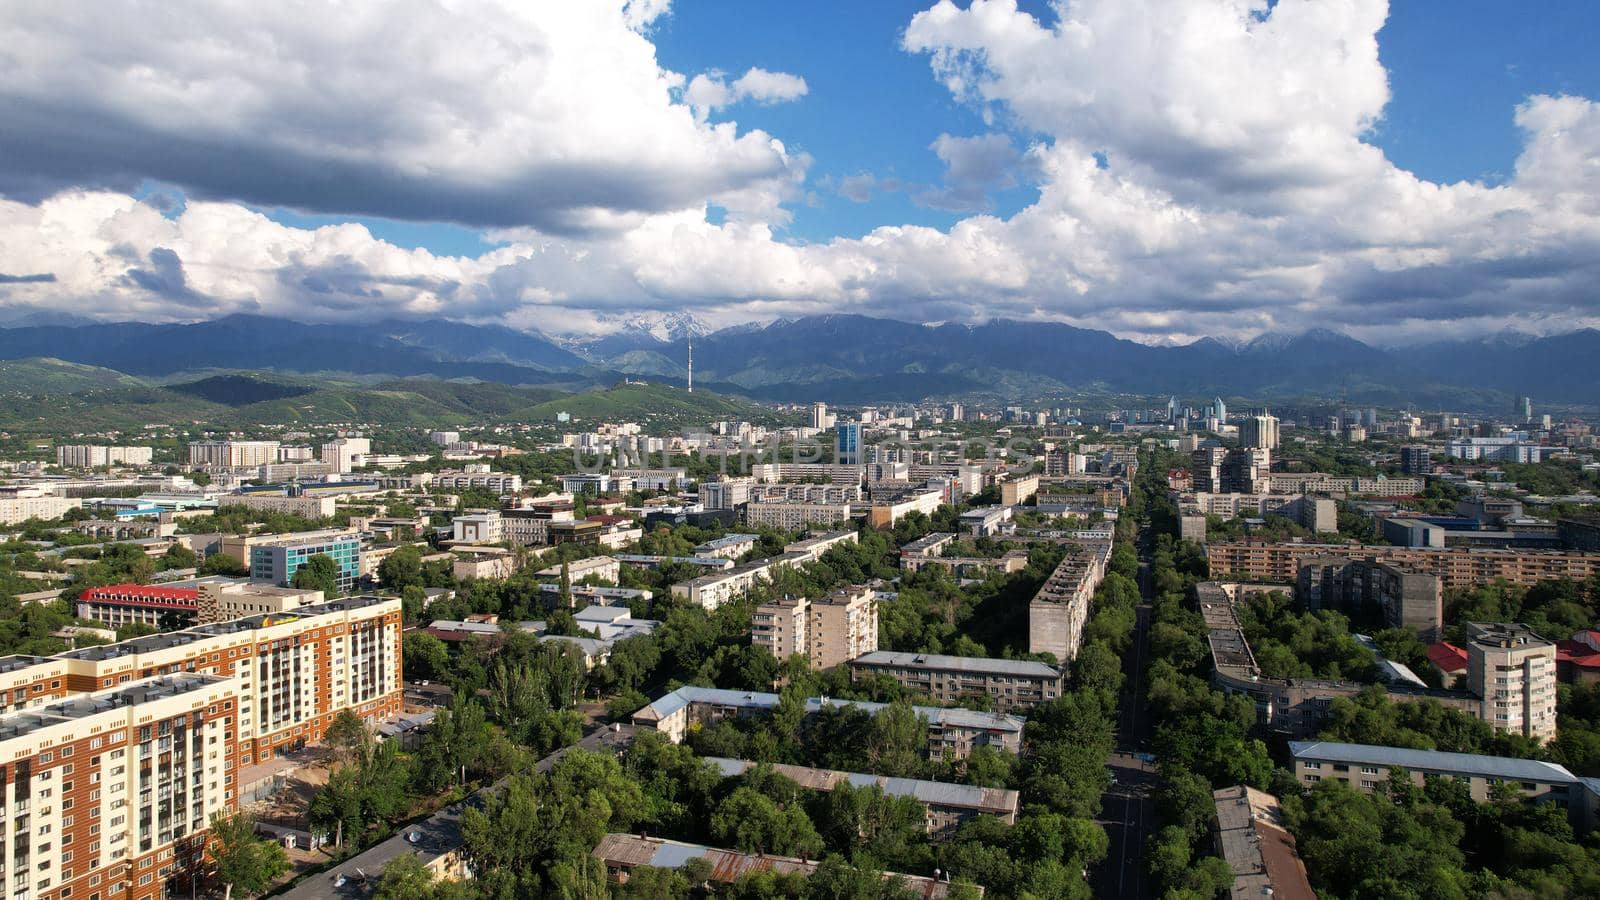 Large dark white clouds over the city of Almaty. Aerial view of the high snowy mountains from the drone. There is a TV tower on the hill. There are many green trees among the houses. A big city